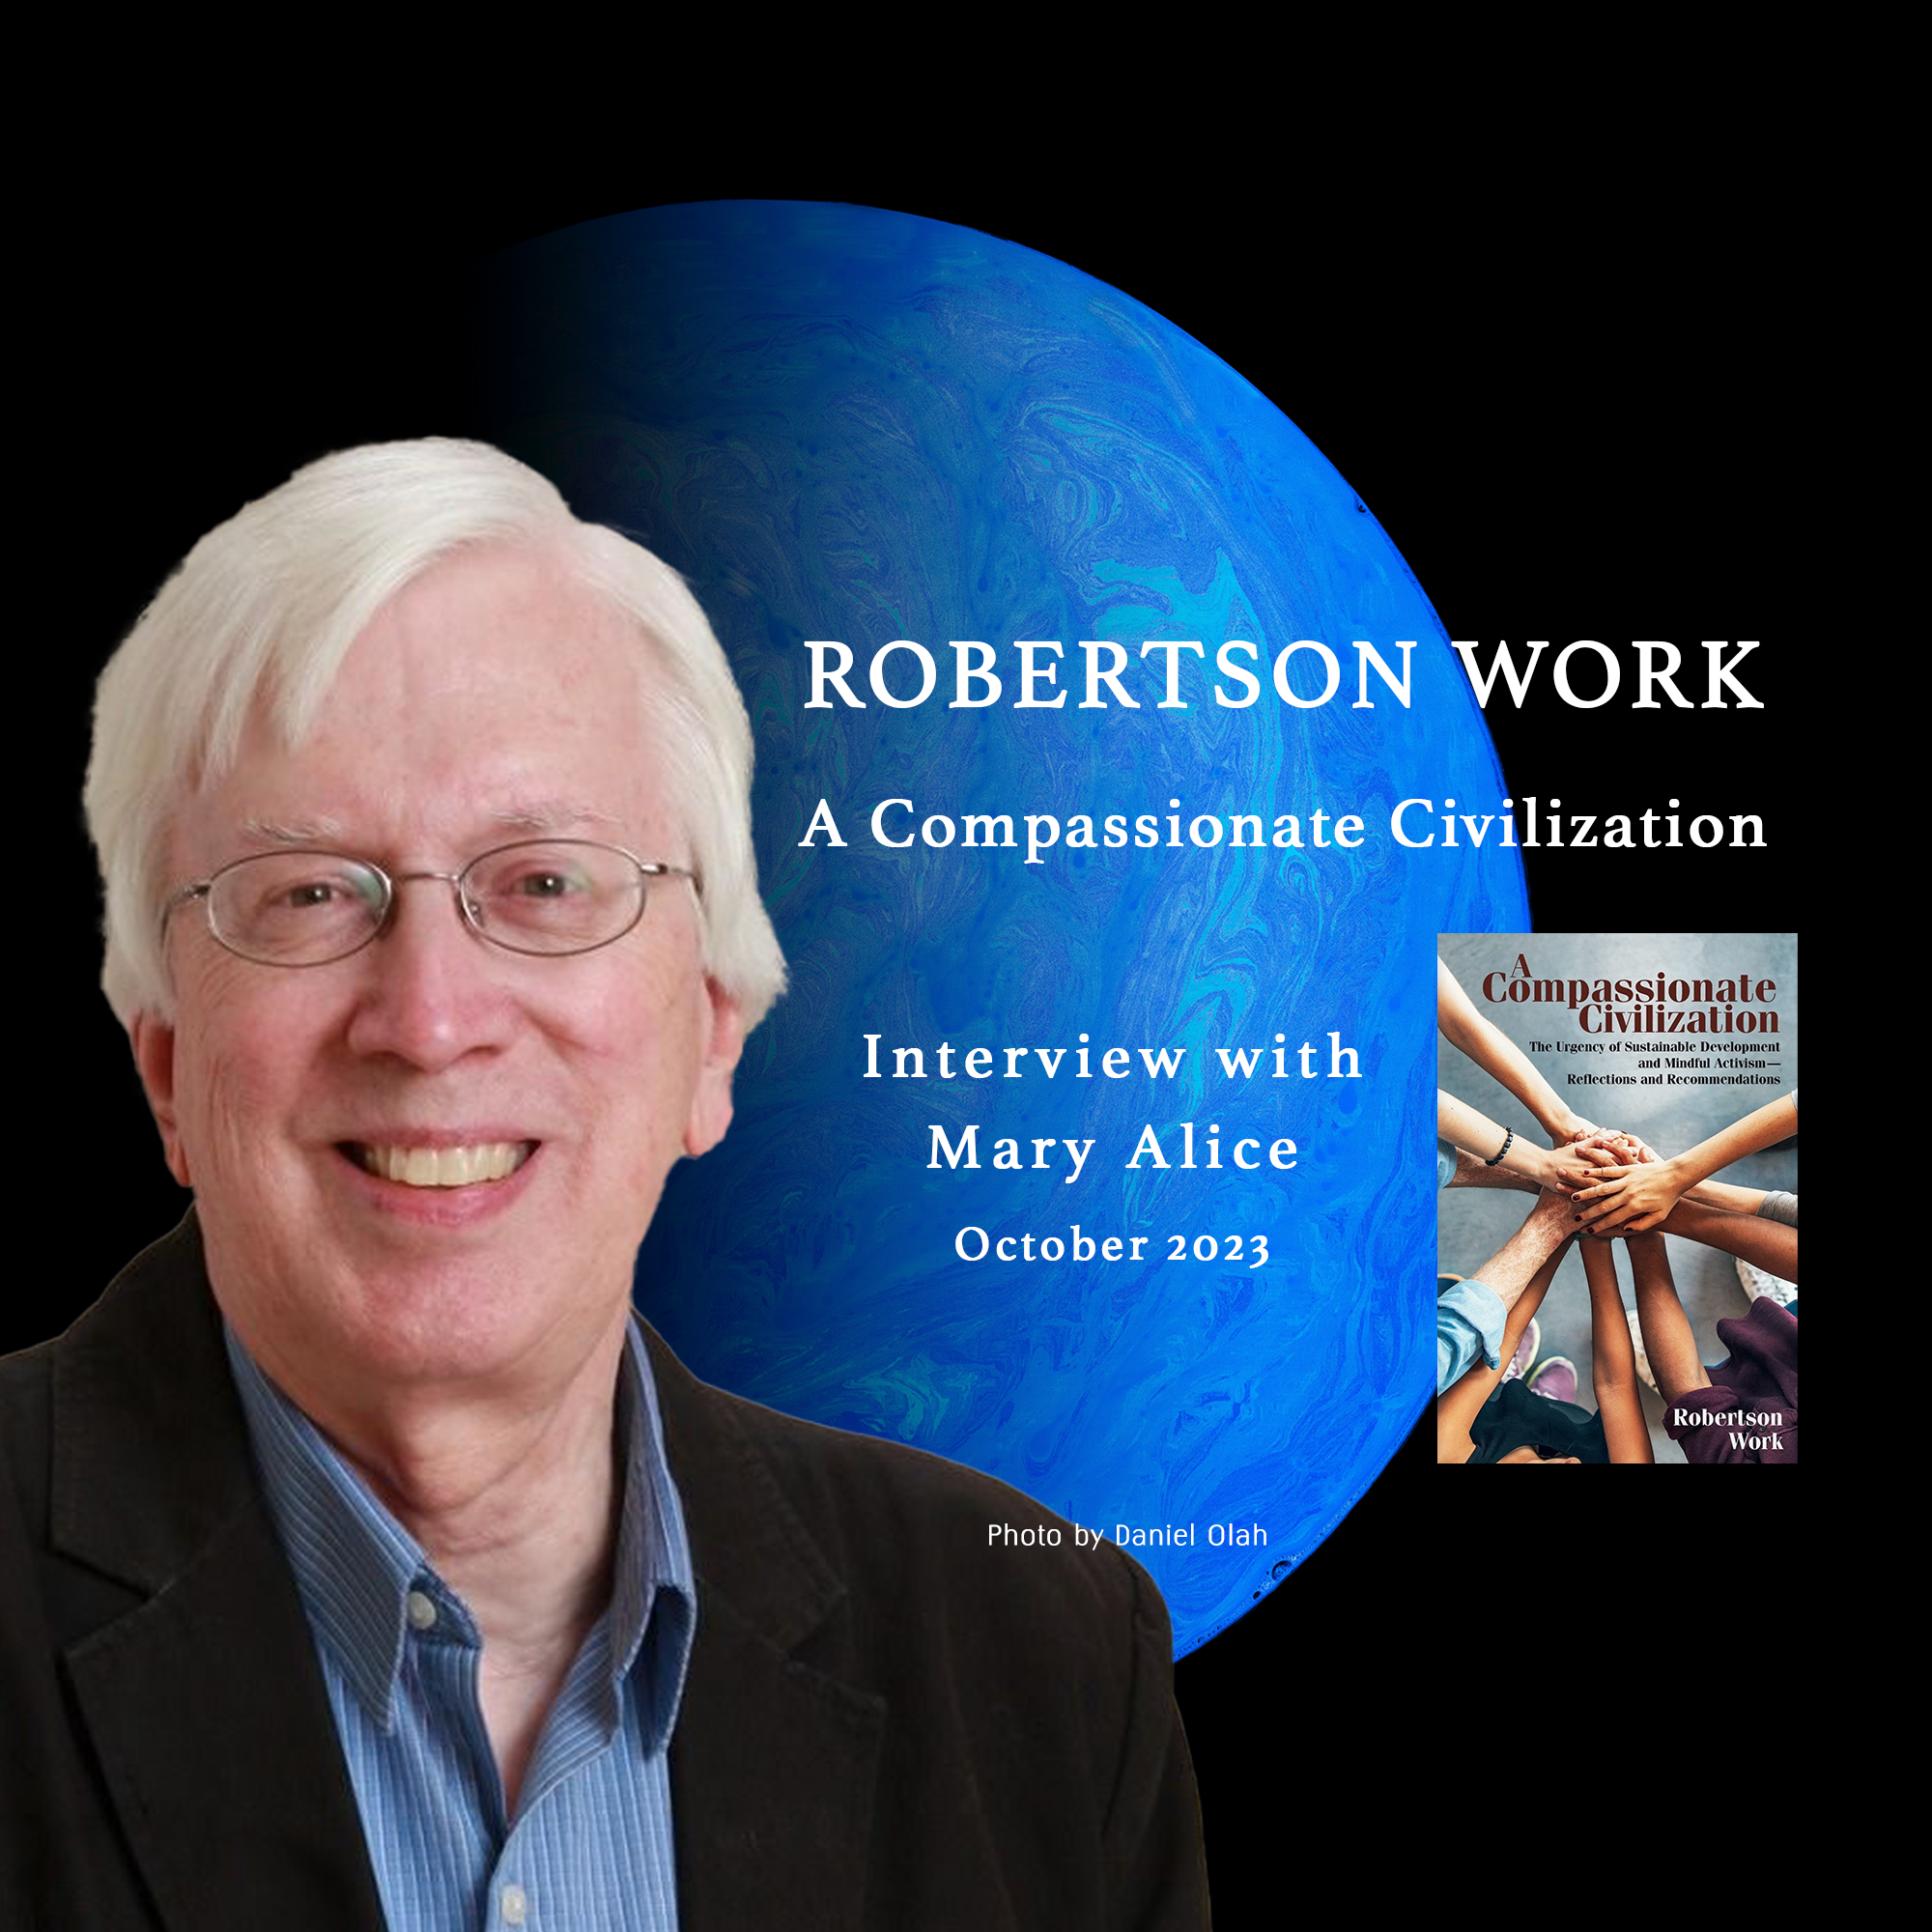 Mary Alice’s Interview with Robertson Work: A Compassionate Civilization